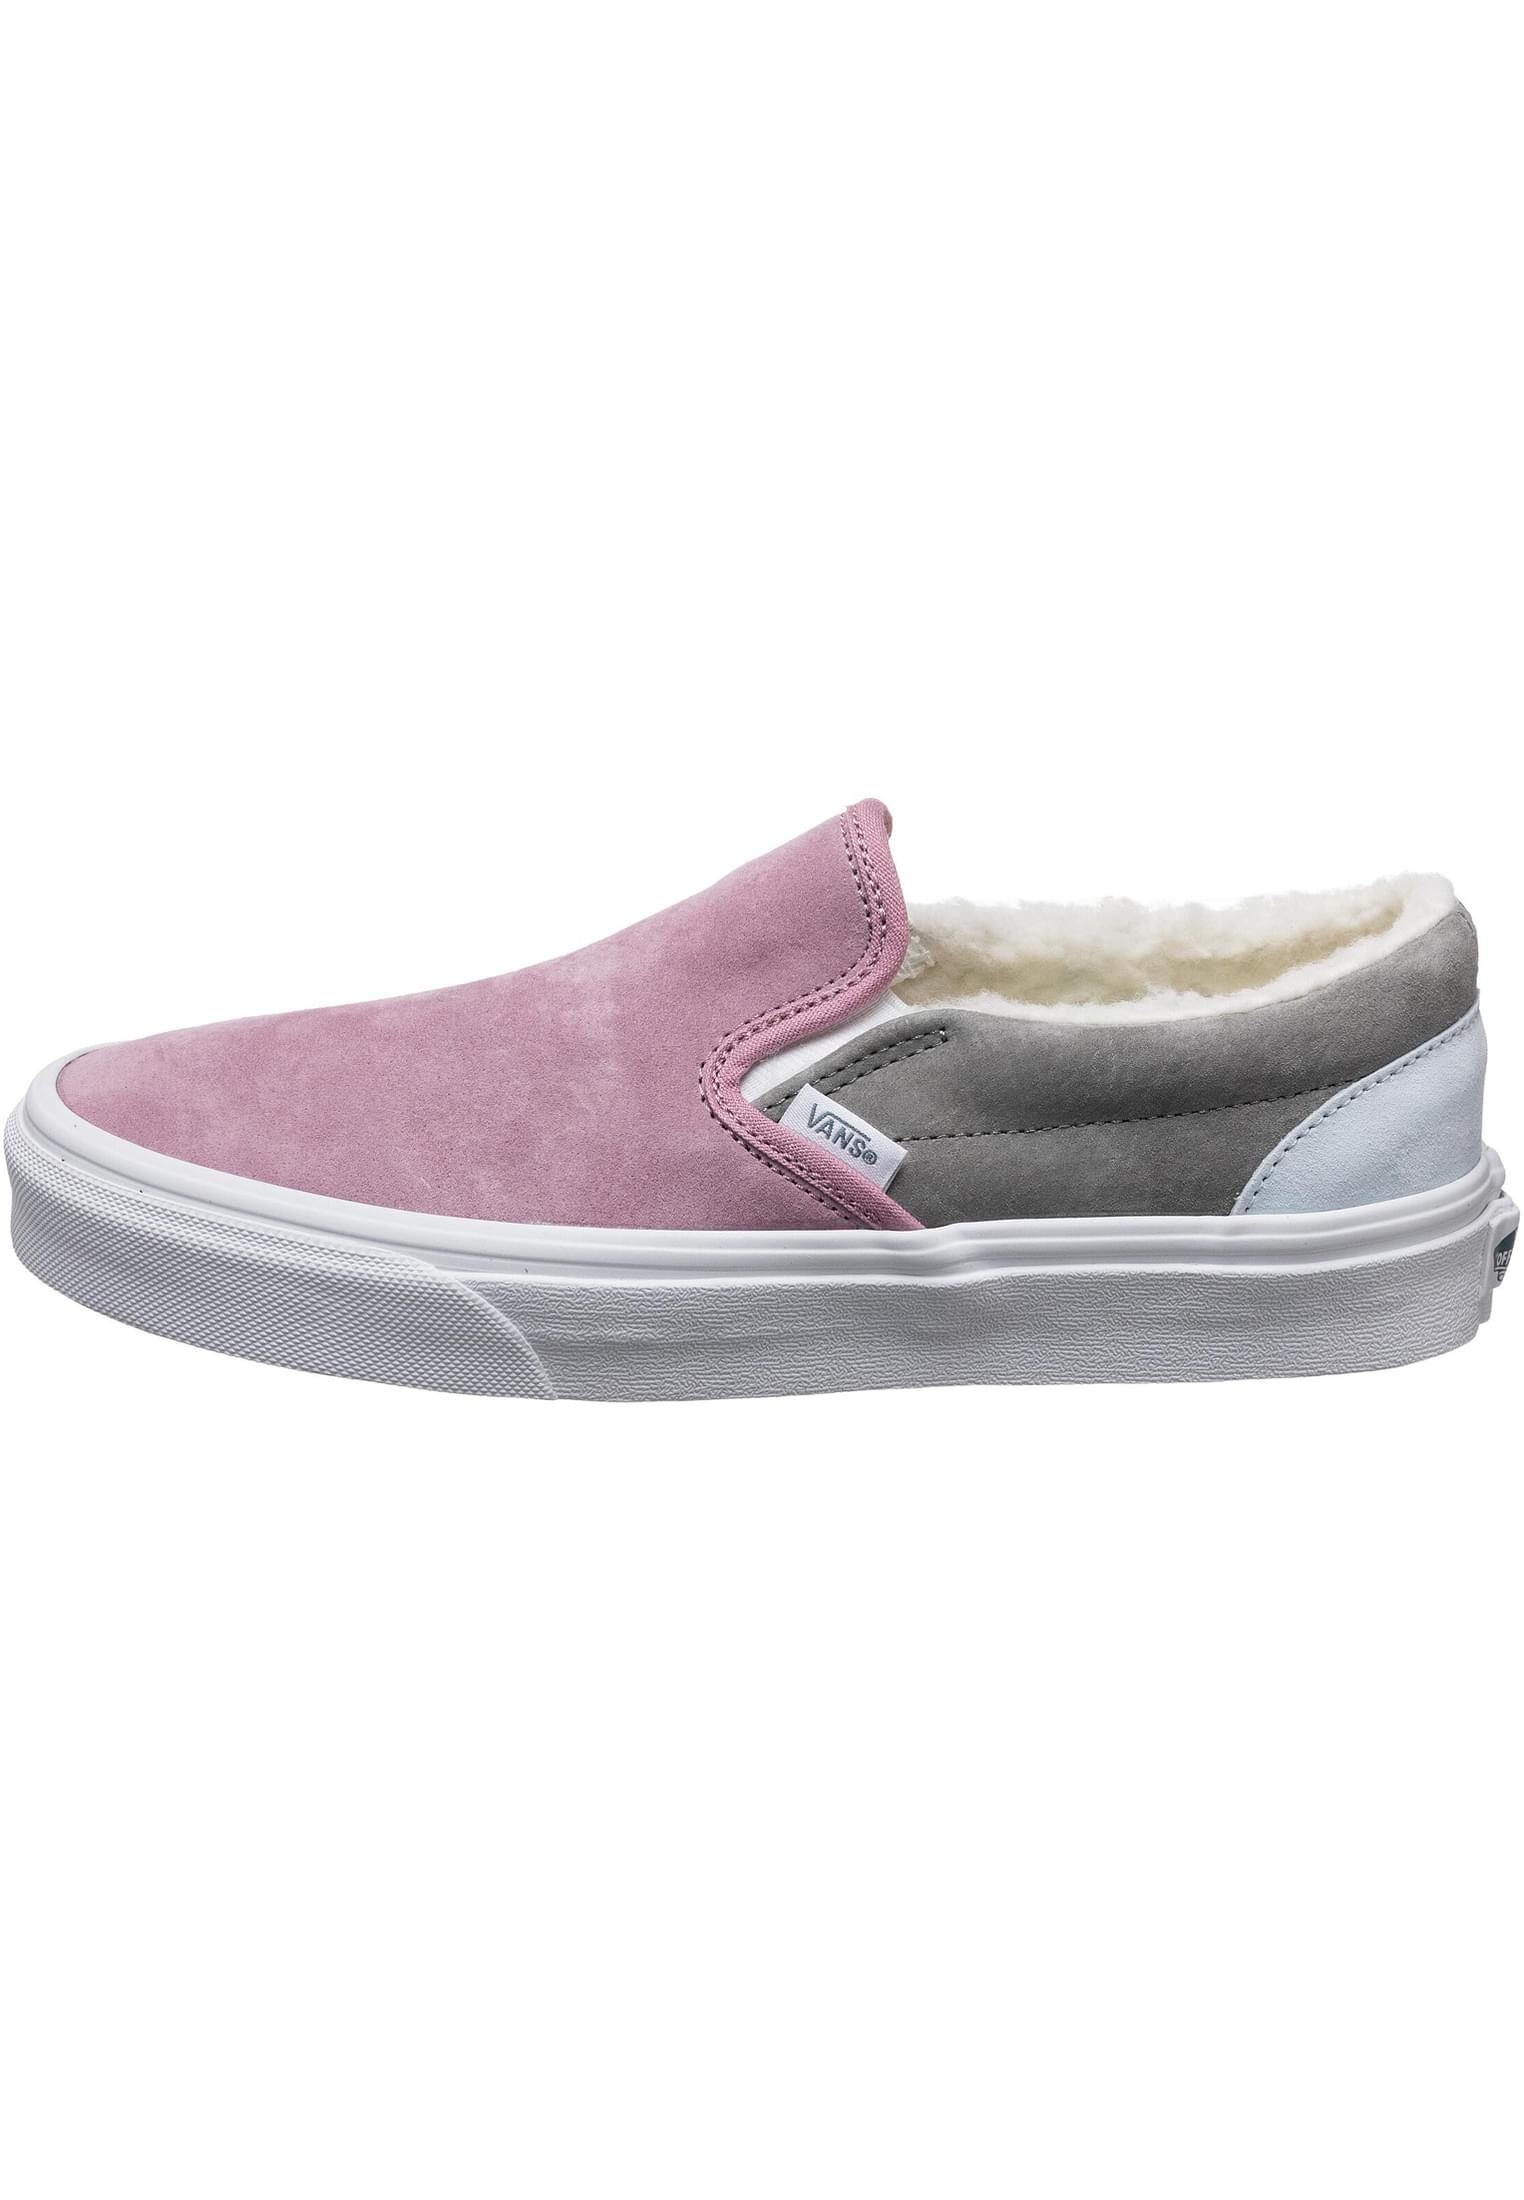 Vans Trainingsschuh »Unisex Vans Ua Classic Slip-On Color Theory Checkerboard Schuh«, (1 tlg.)